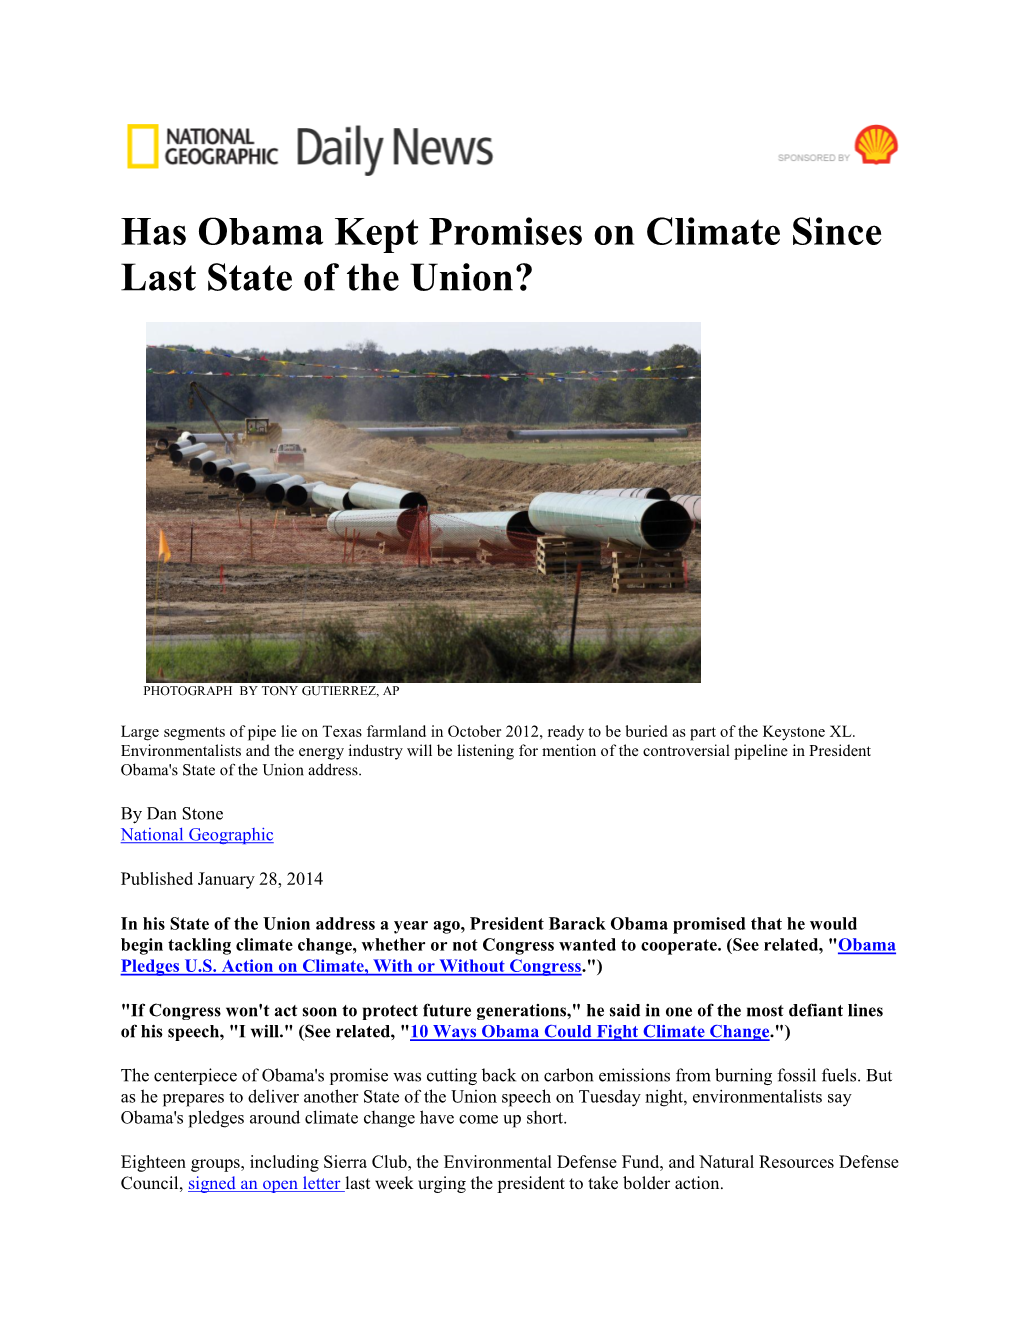 Has Obama Kept Promises on Climate Since Last State of the Union?